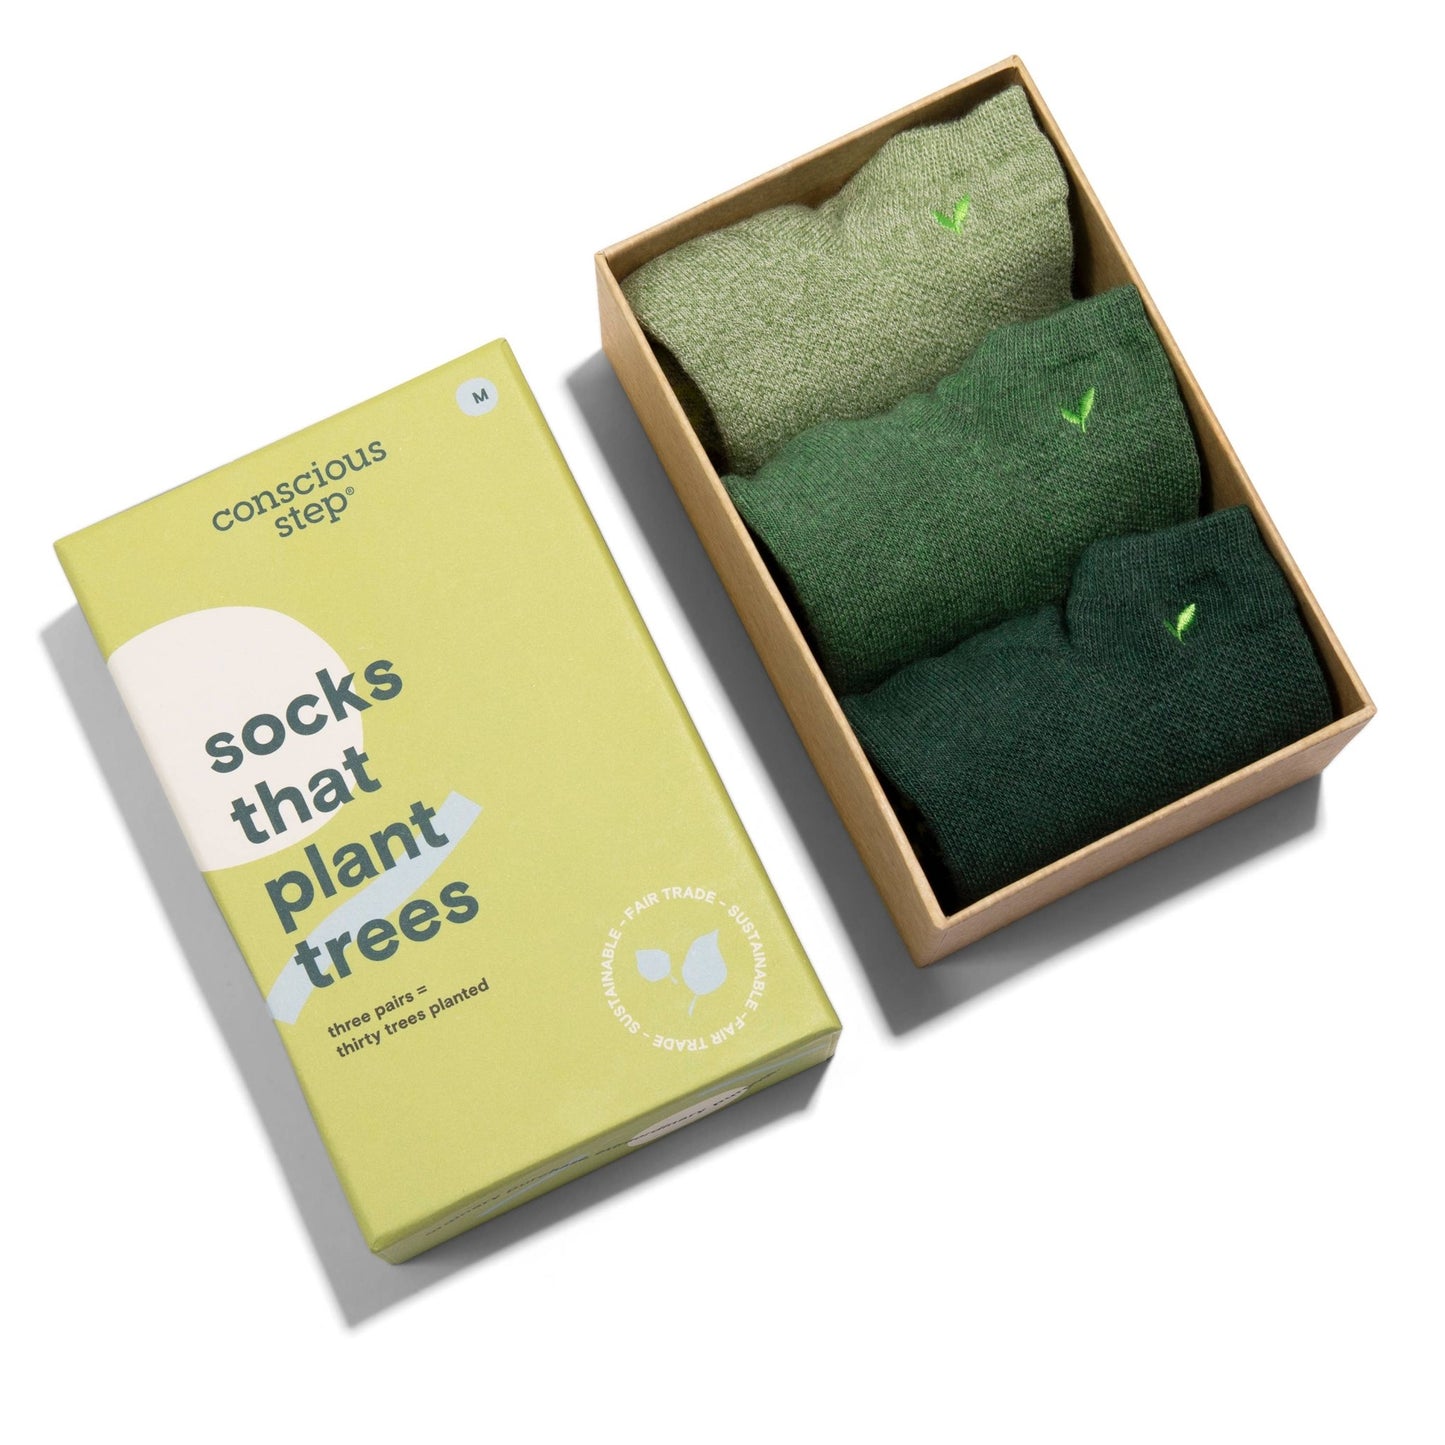 Boxed Set Ankle Socks that Plant Trees: Small - Echo Market